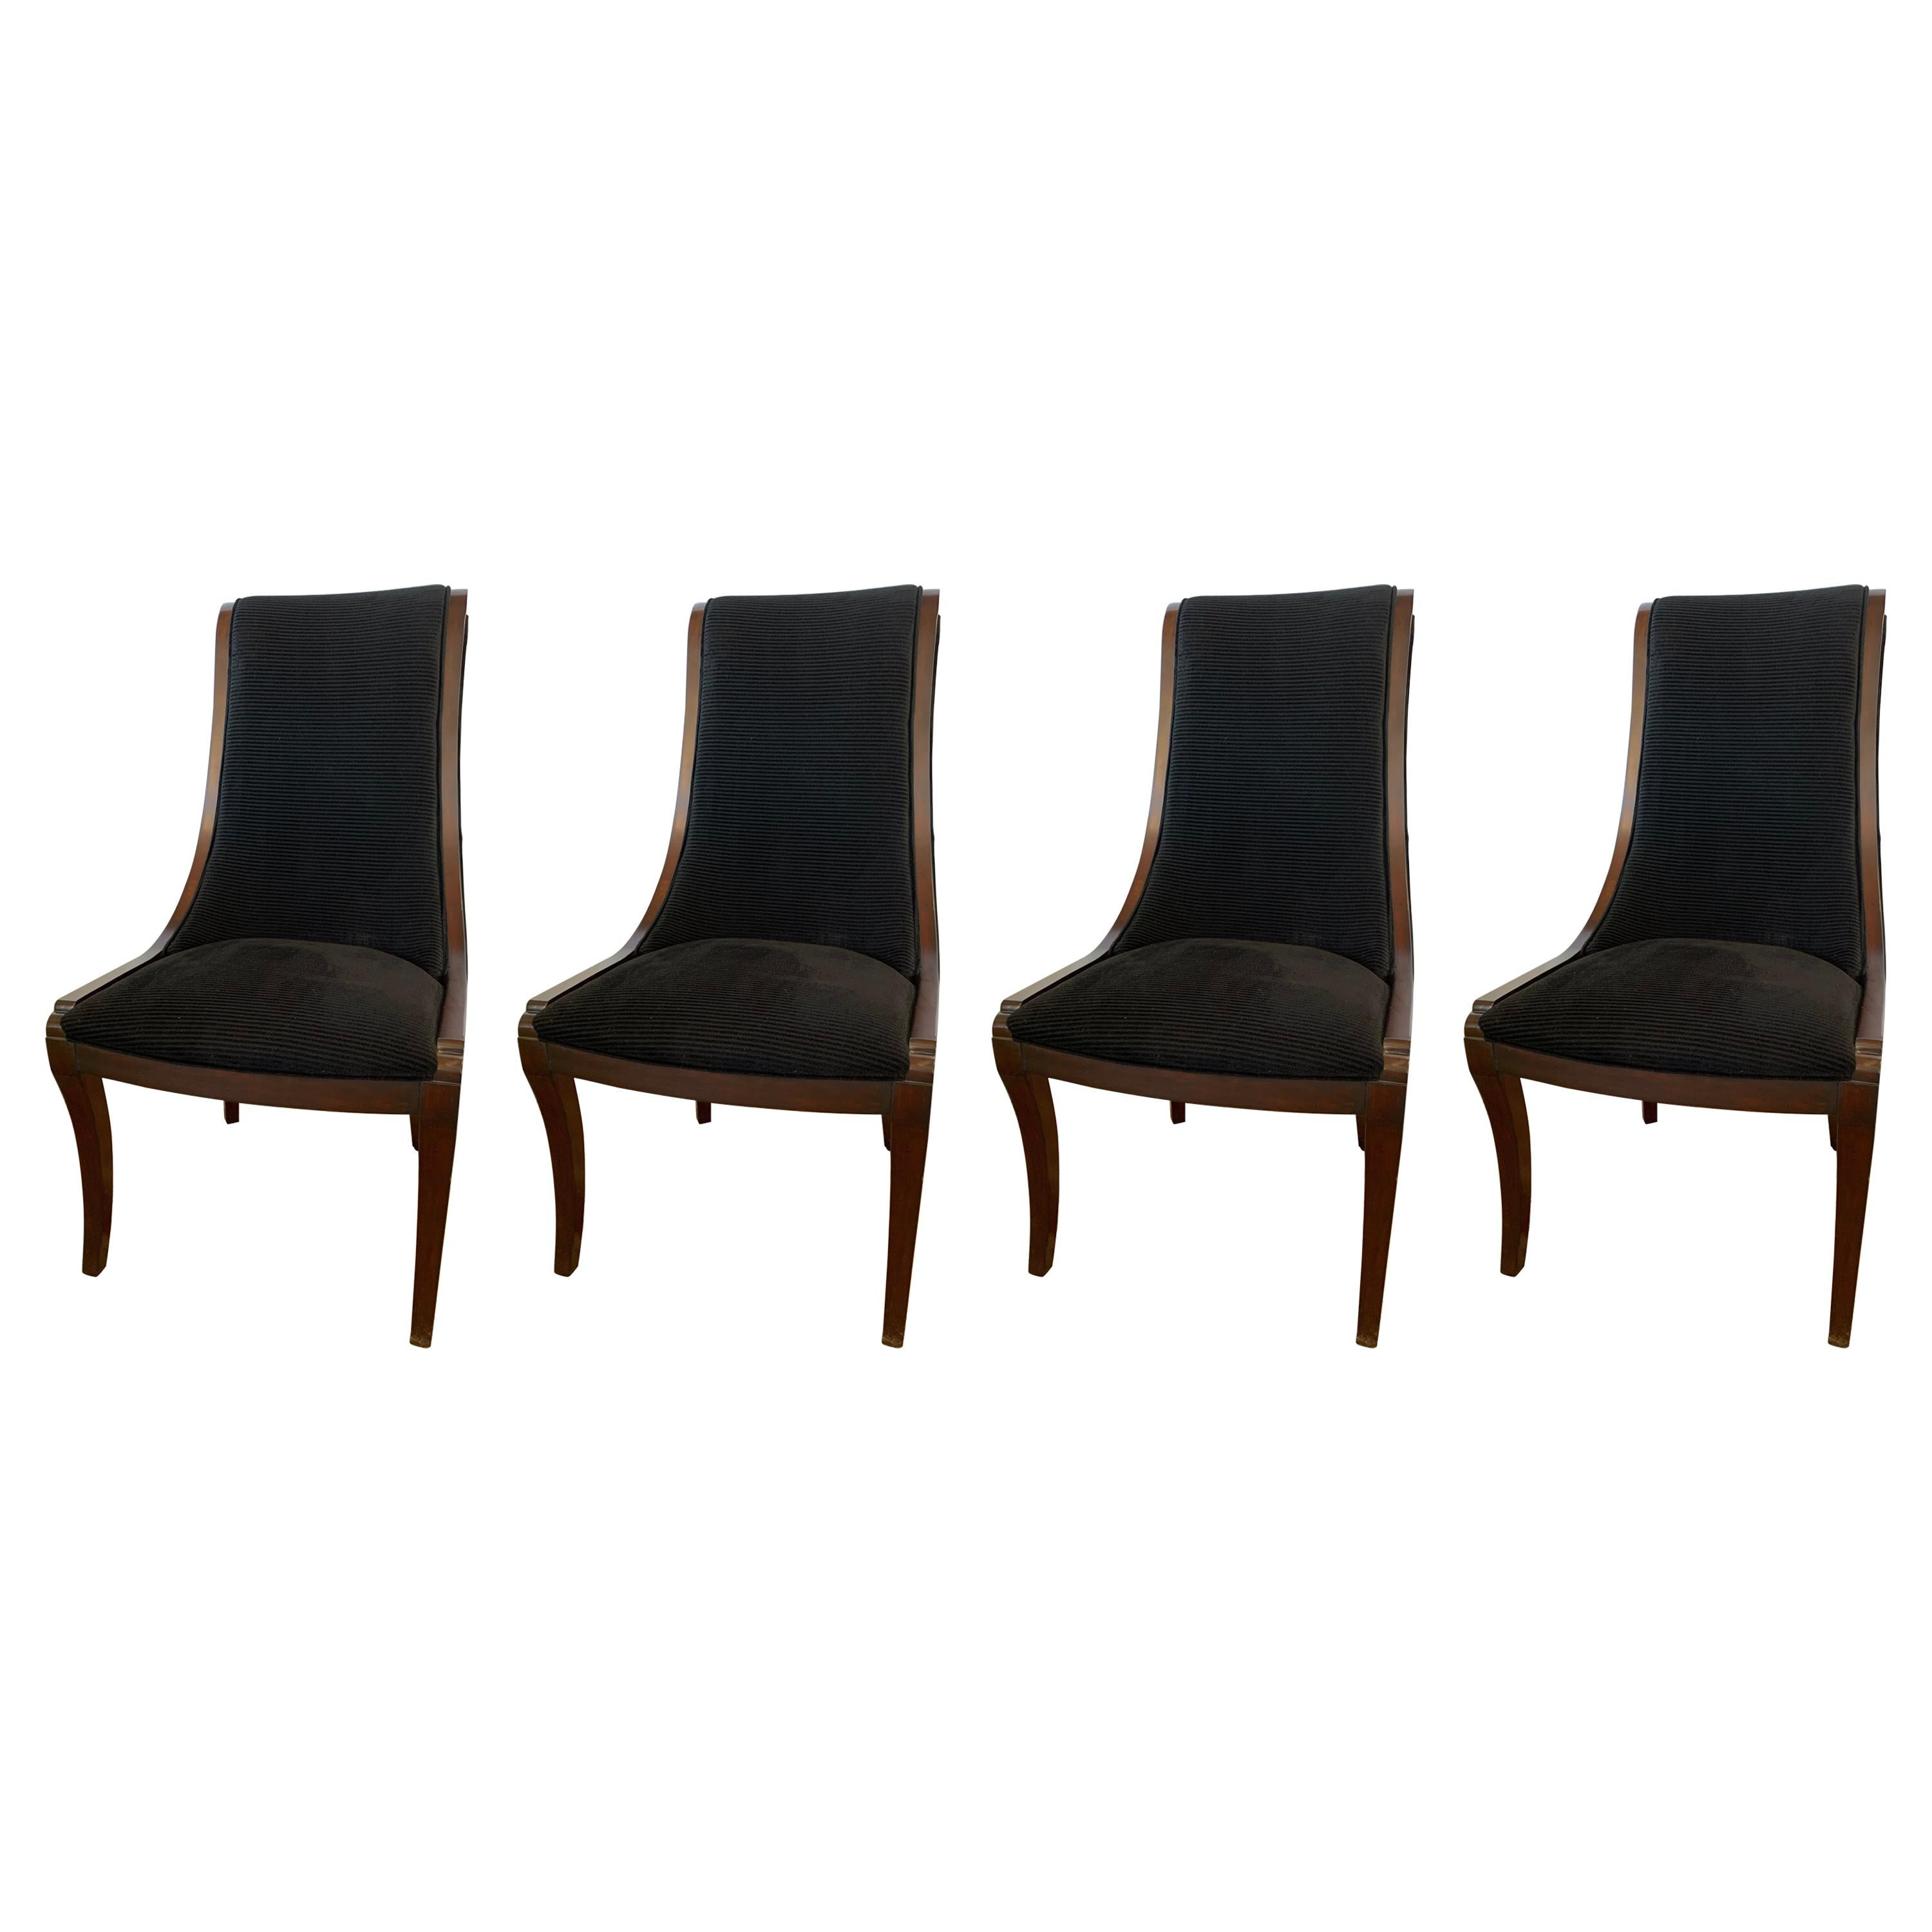 Set of Four Henredon Matching Dining Chairs with Black Velvet Upholstery